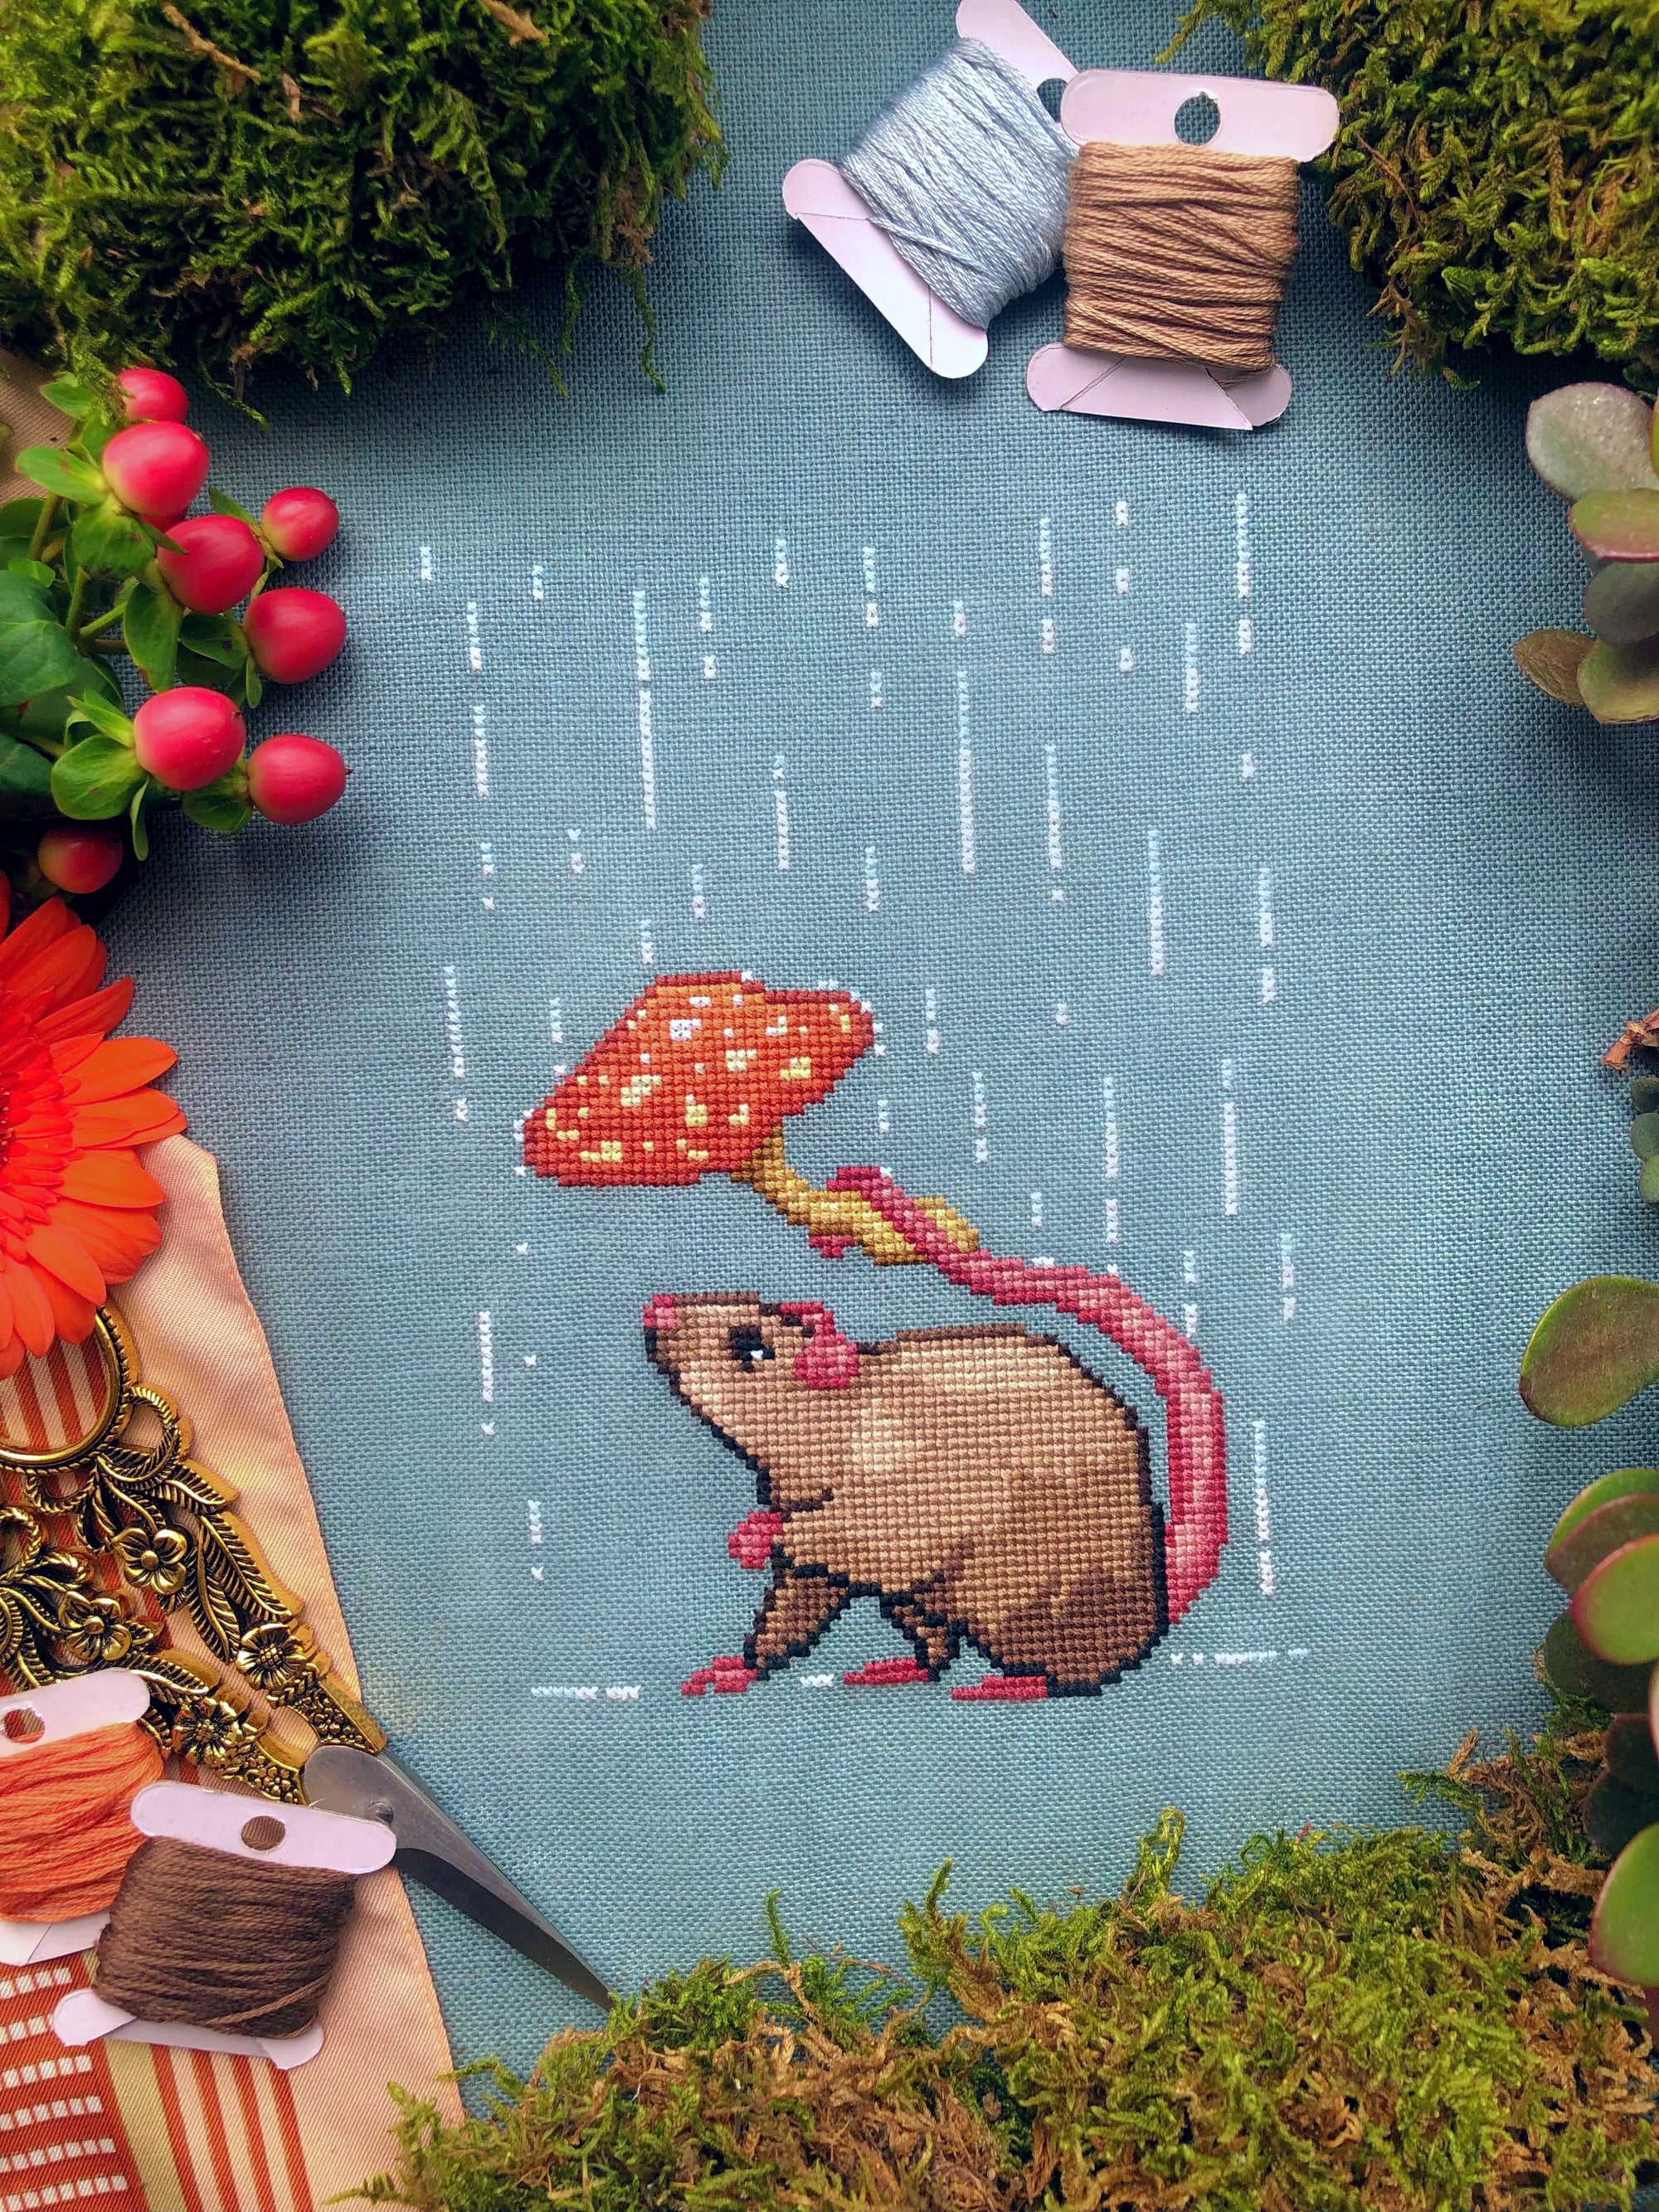 Topdown image of Rainy days rat cross stitch pattern. Fabric is turqois-blue, rat is brown with a pink tail. He is holding a mushroom over his head. His head is tilted upwards. His little paw is in the air. The mushroom keeps the rain out of his face